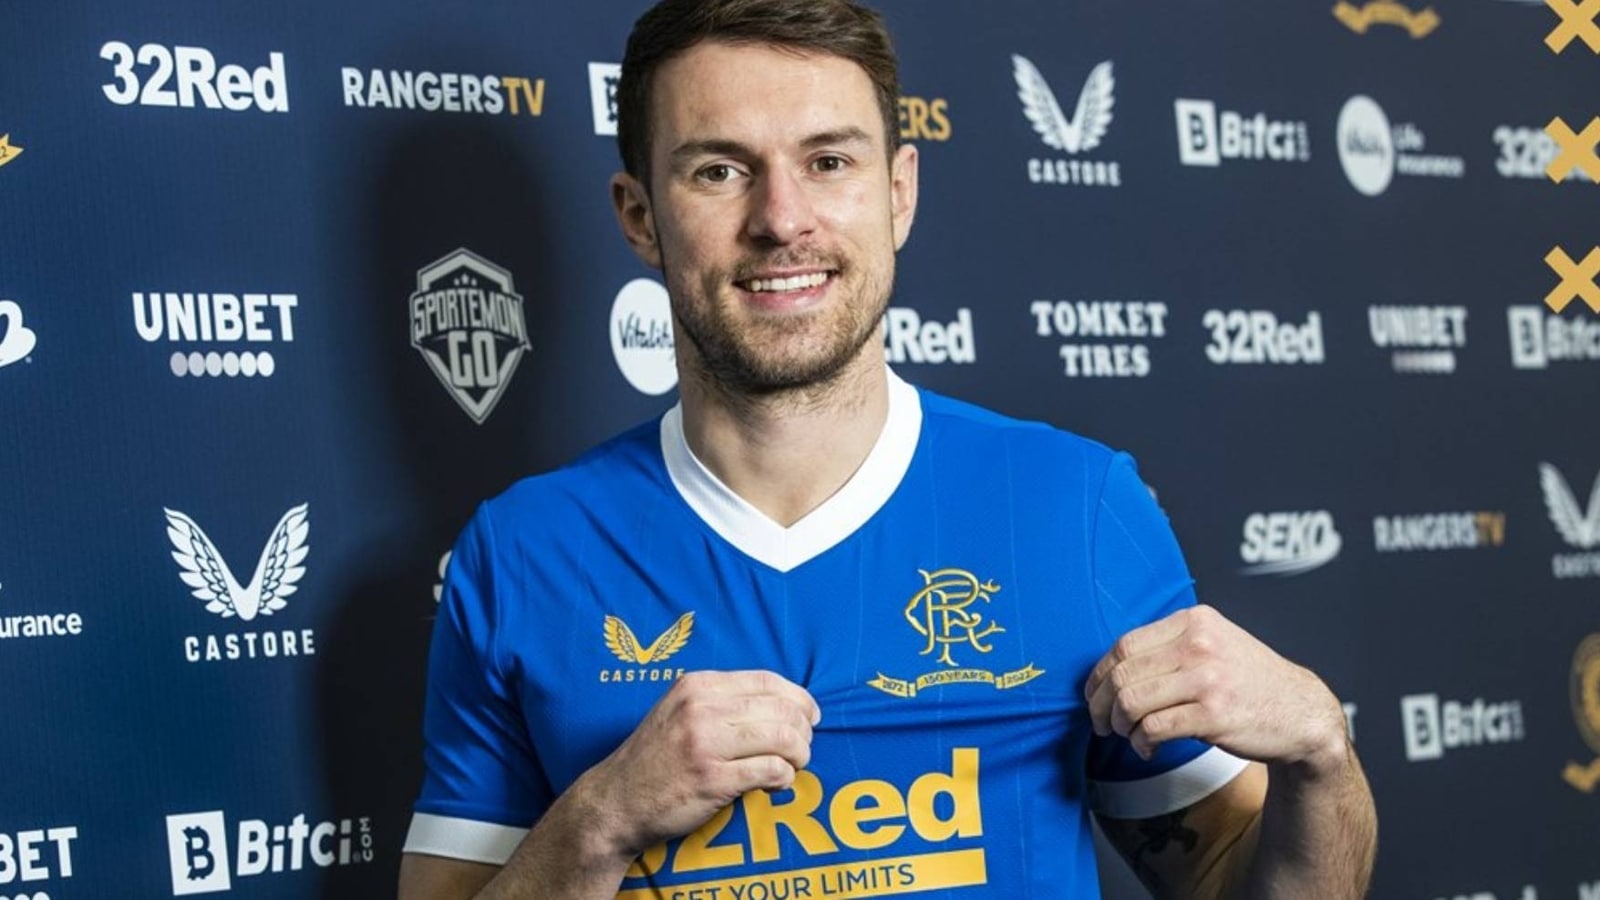 Cardiff City sign Aaron Ramsey on two-year deal